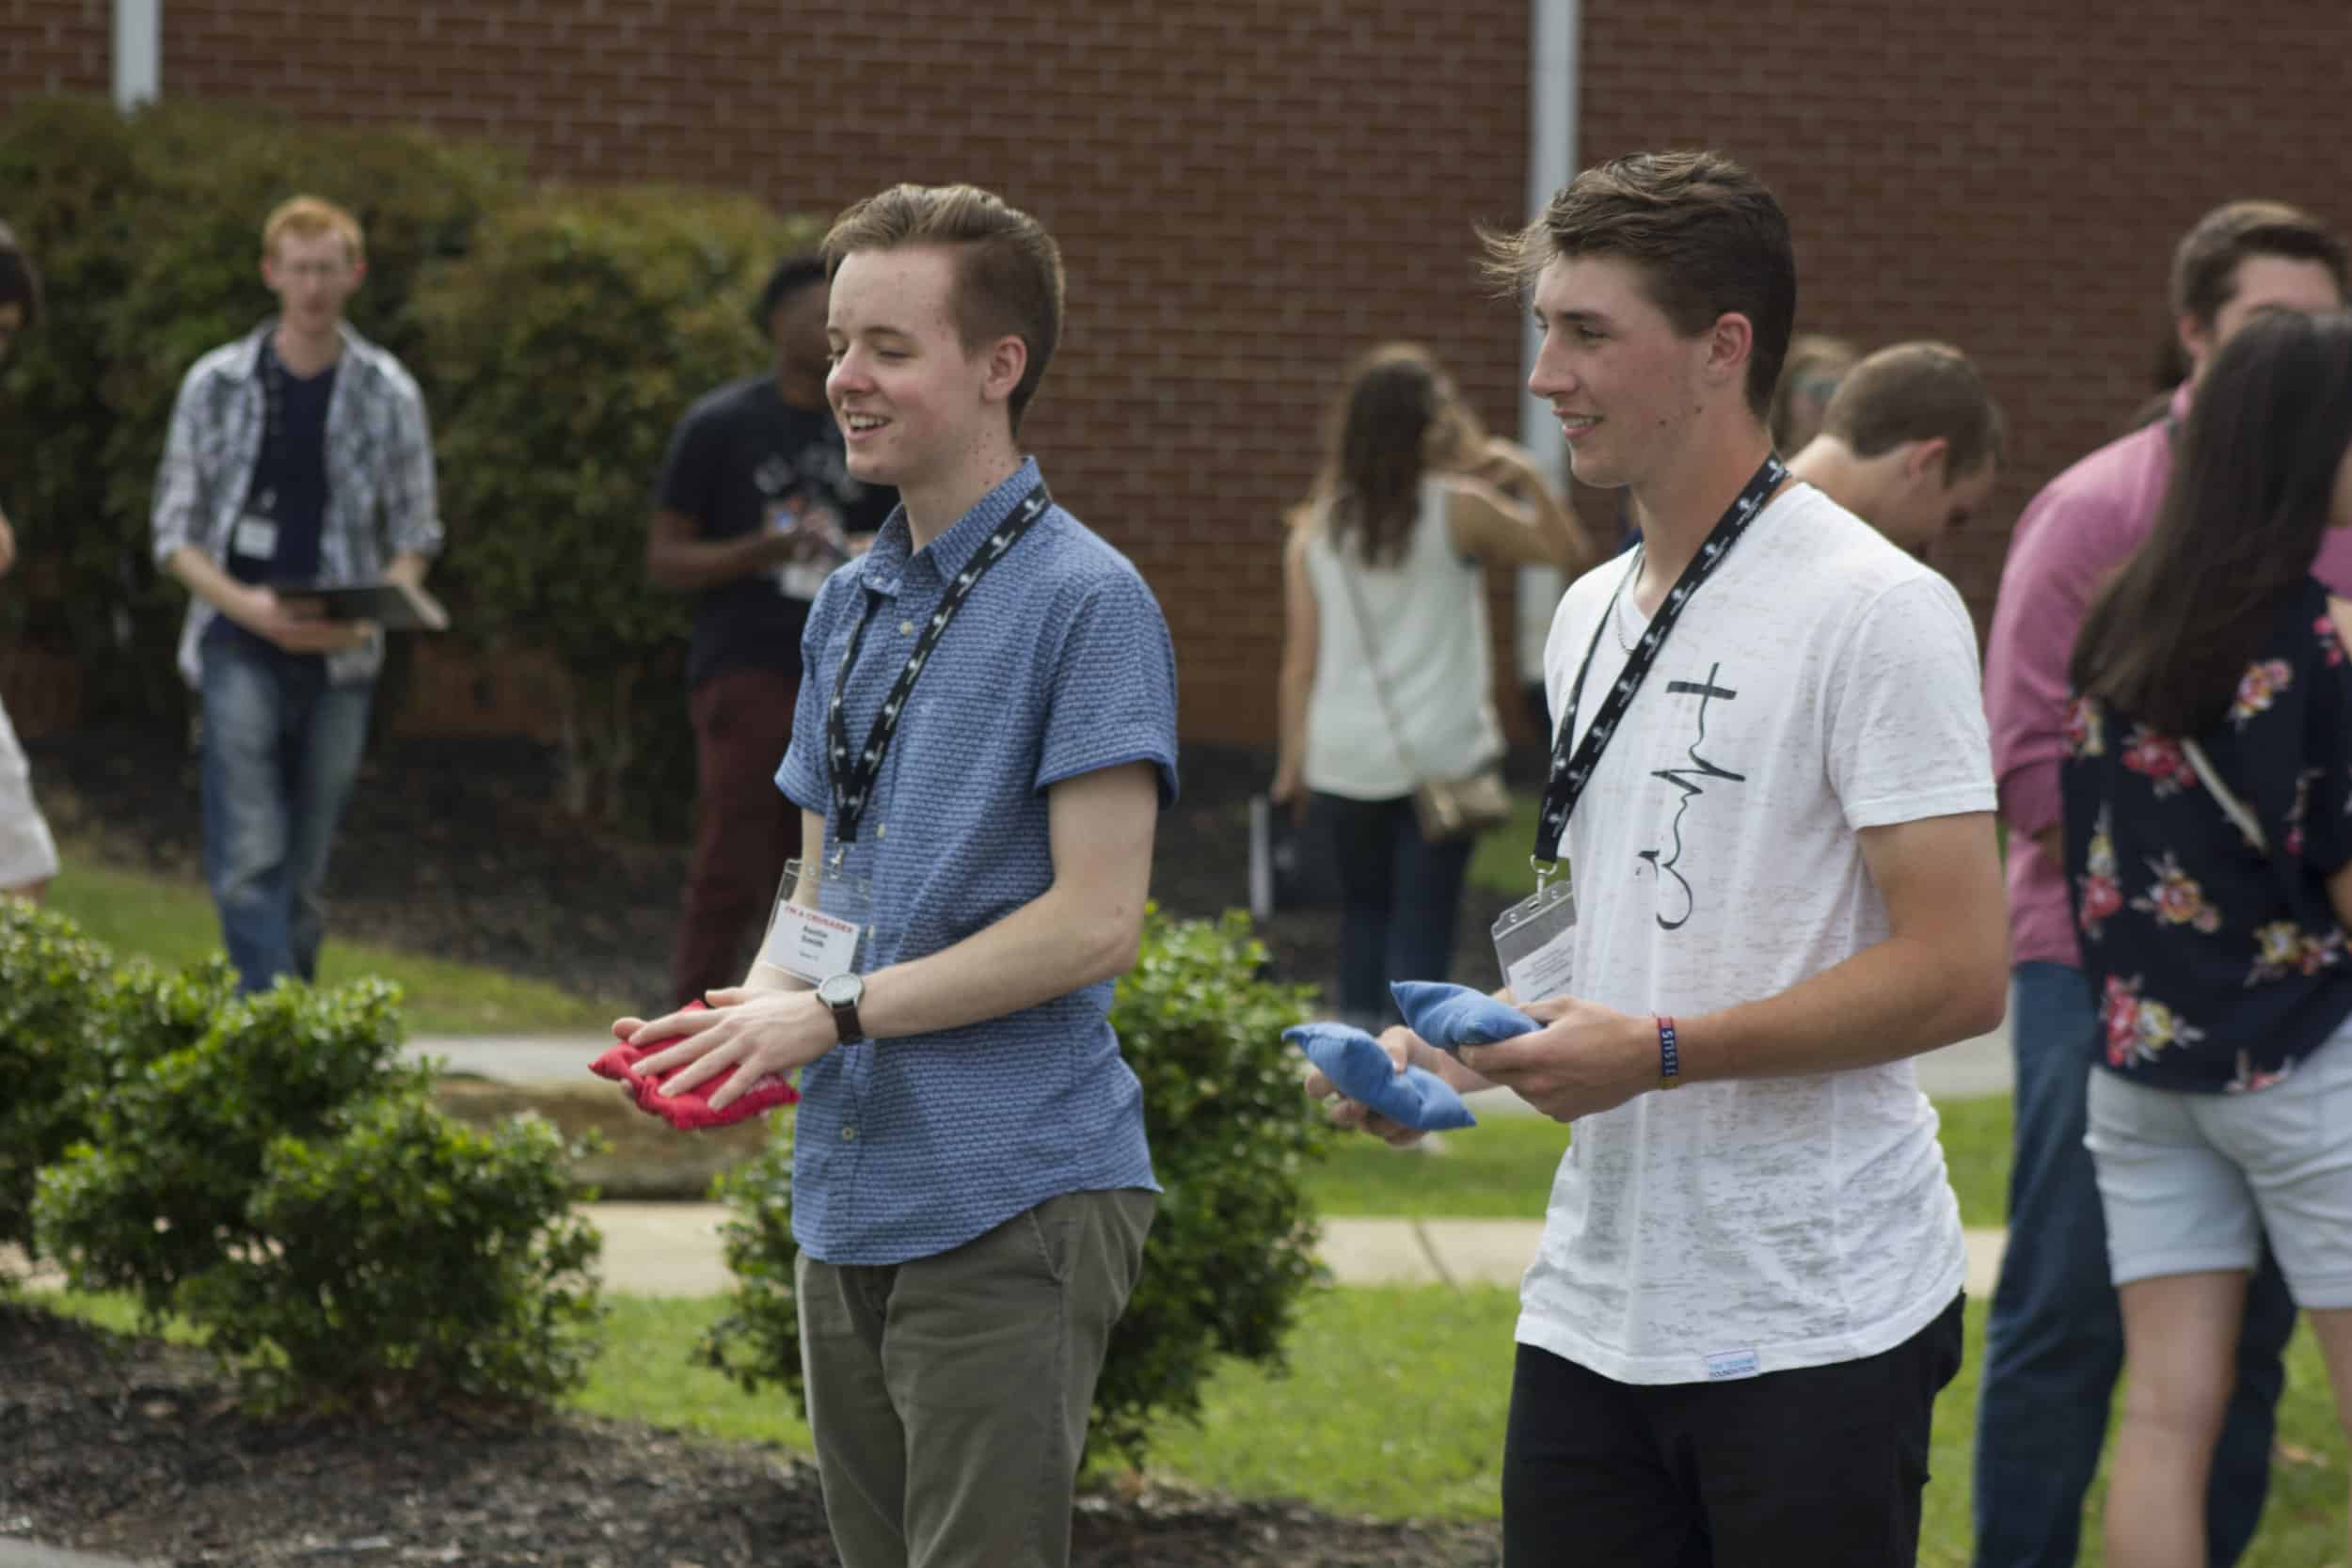 Austin Smith (left) and Ben Matthews (right) compete in a game of corn hole with other future classmates.